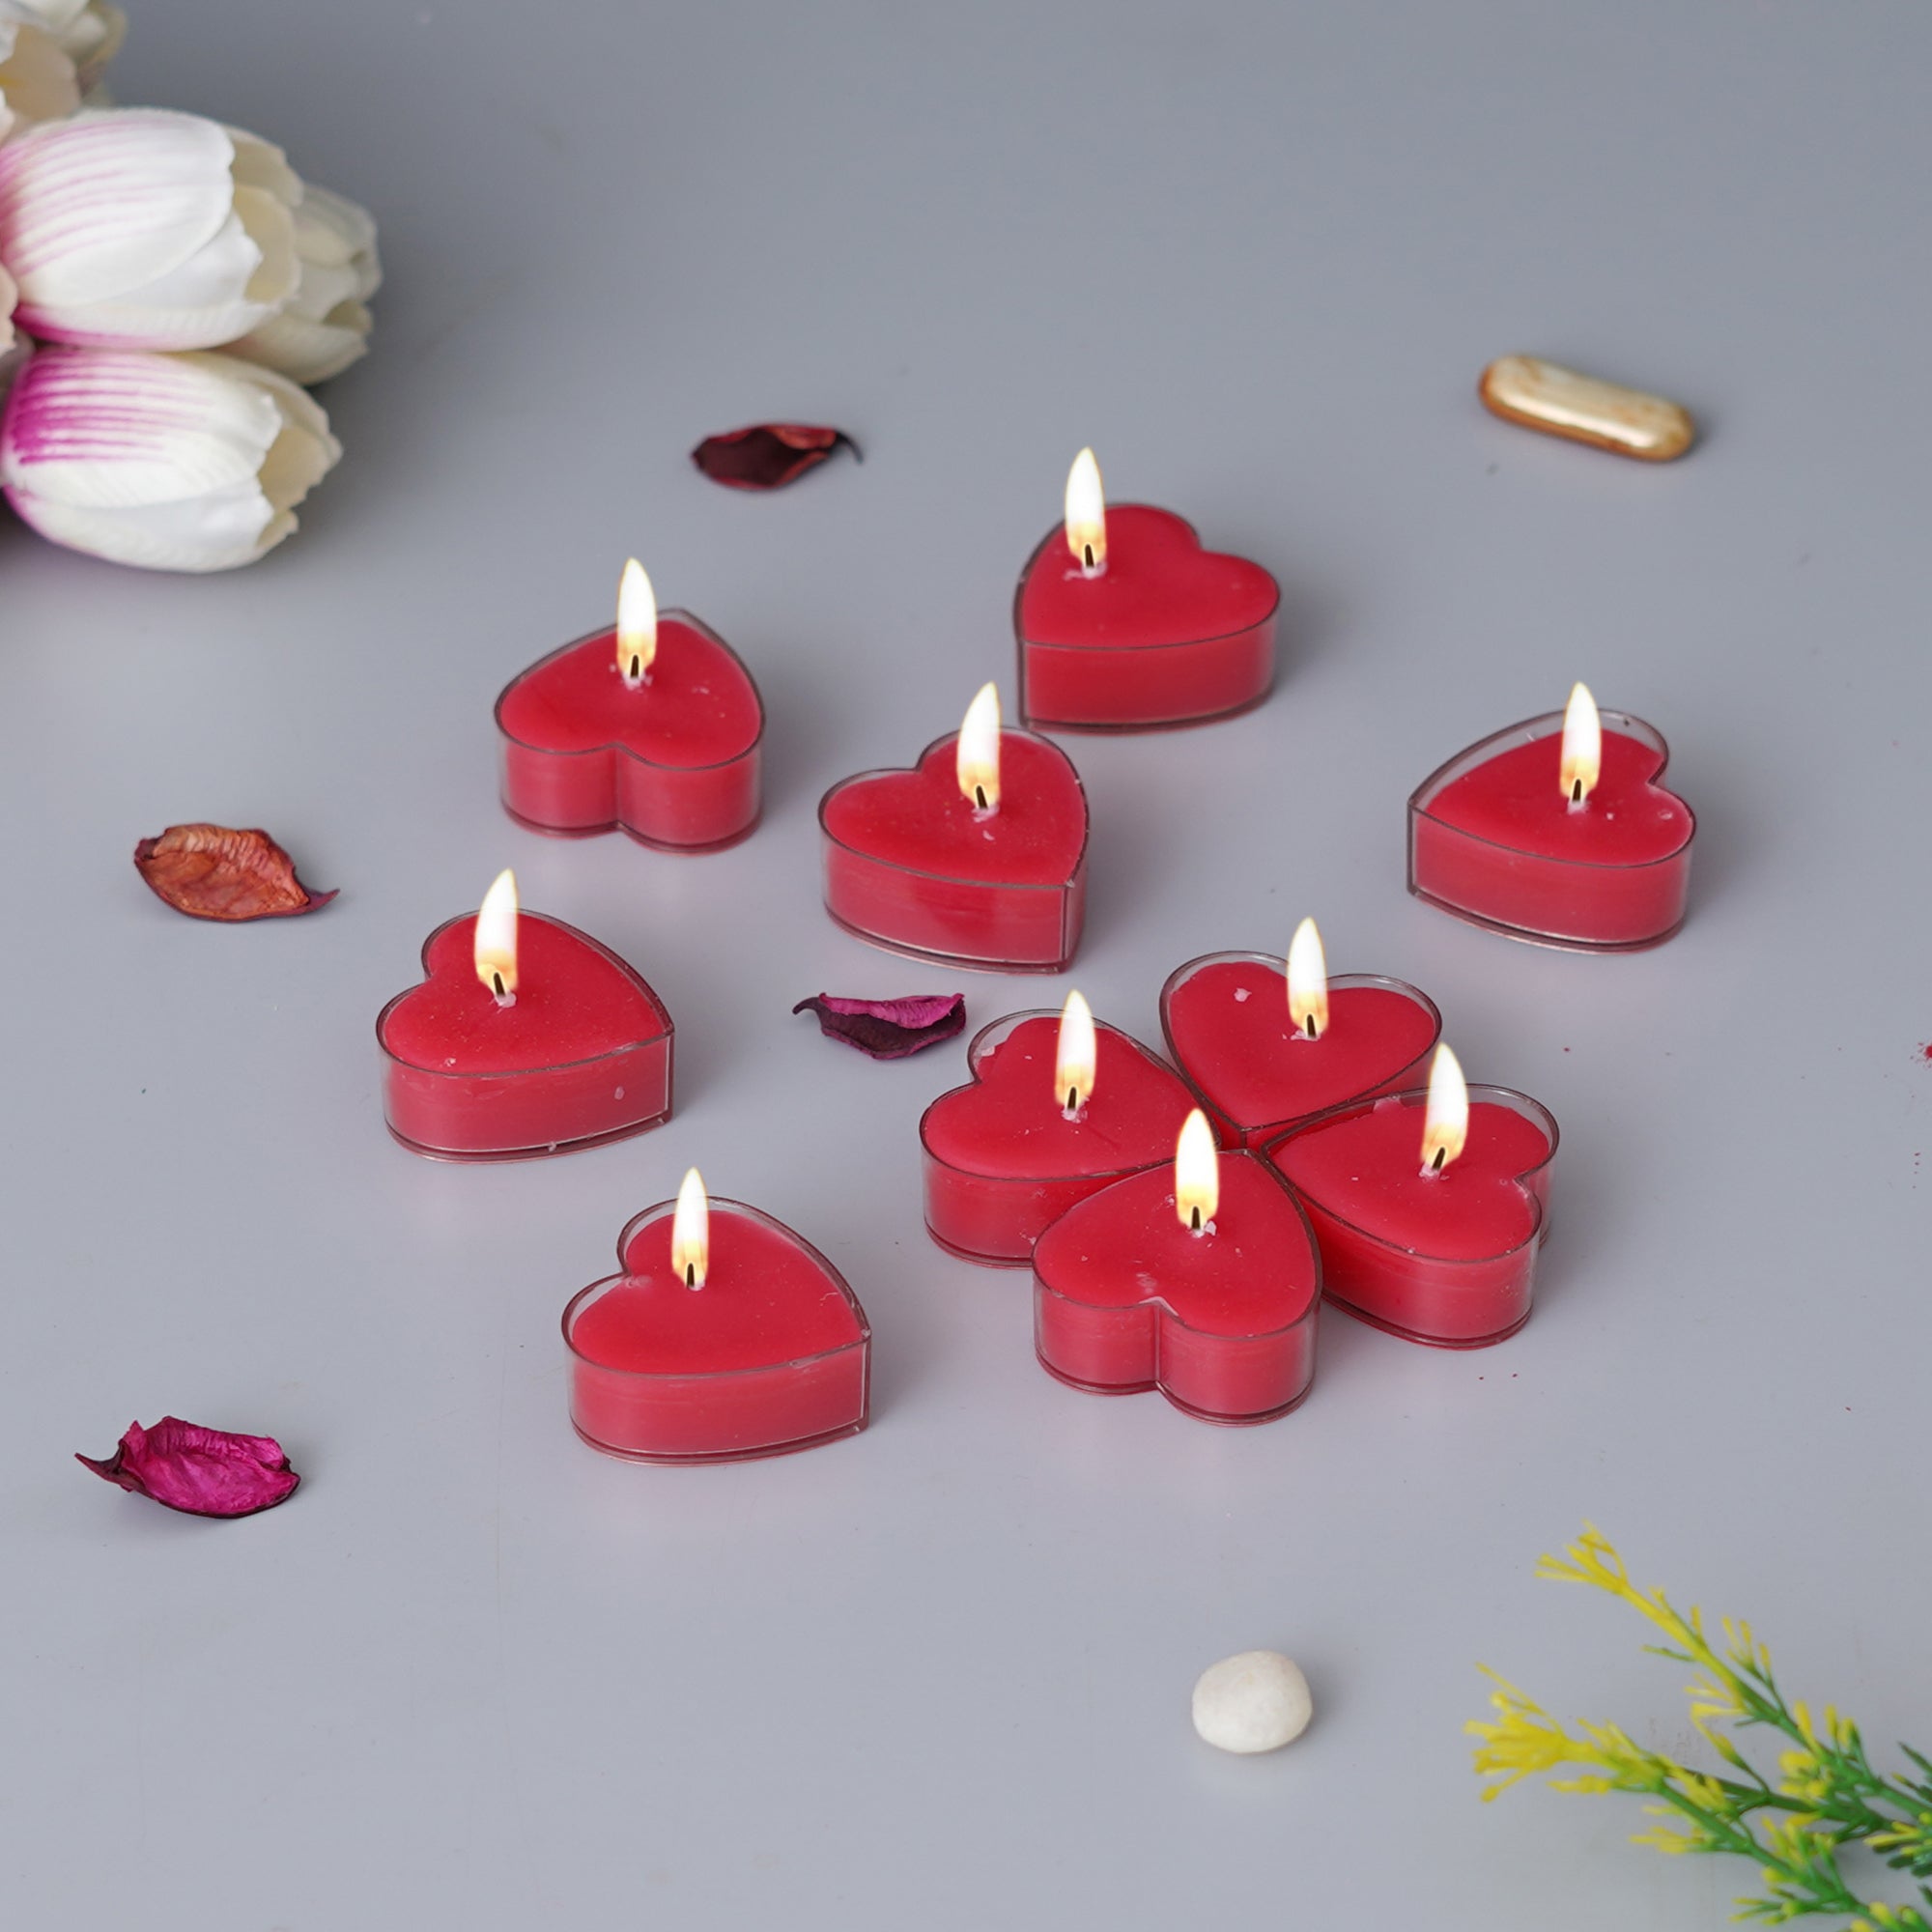 Set Of 50 Romantic Heart Shaped Rose Scented Tea Light Candles